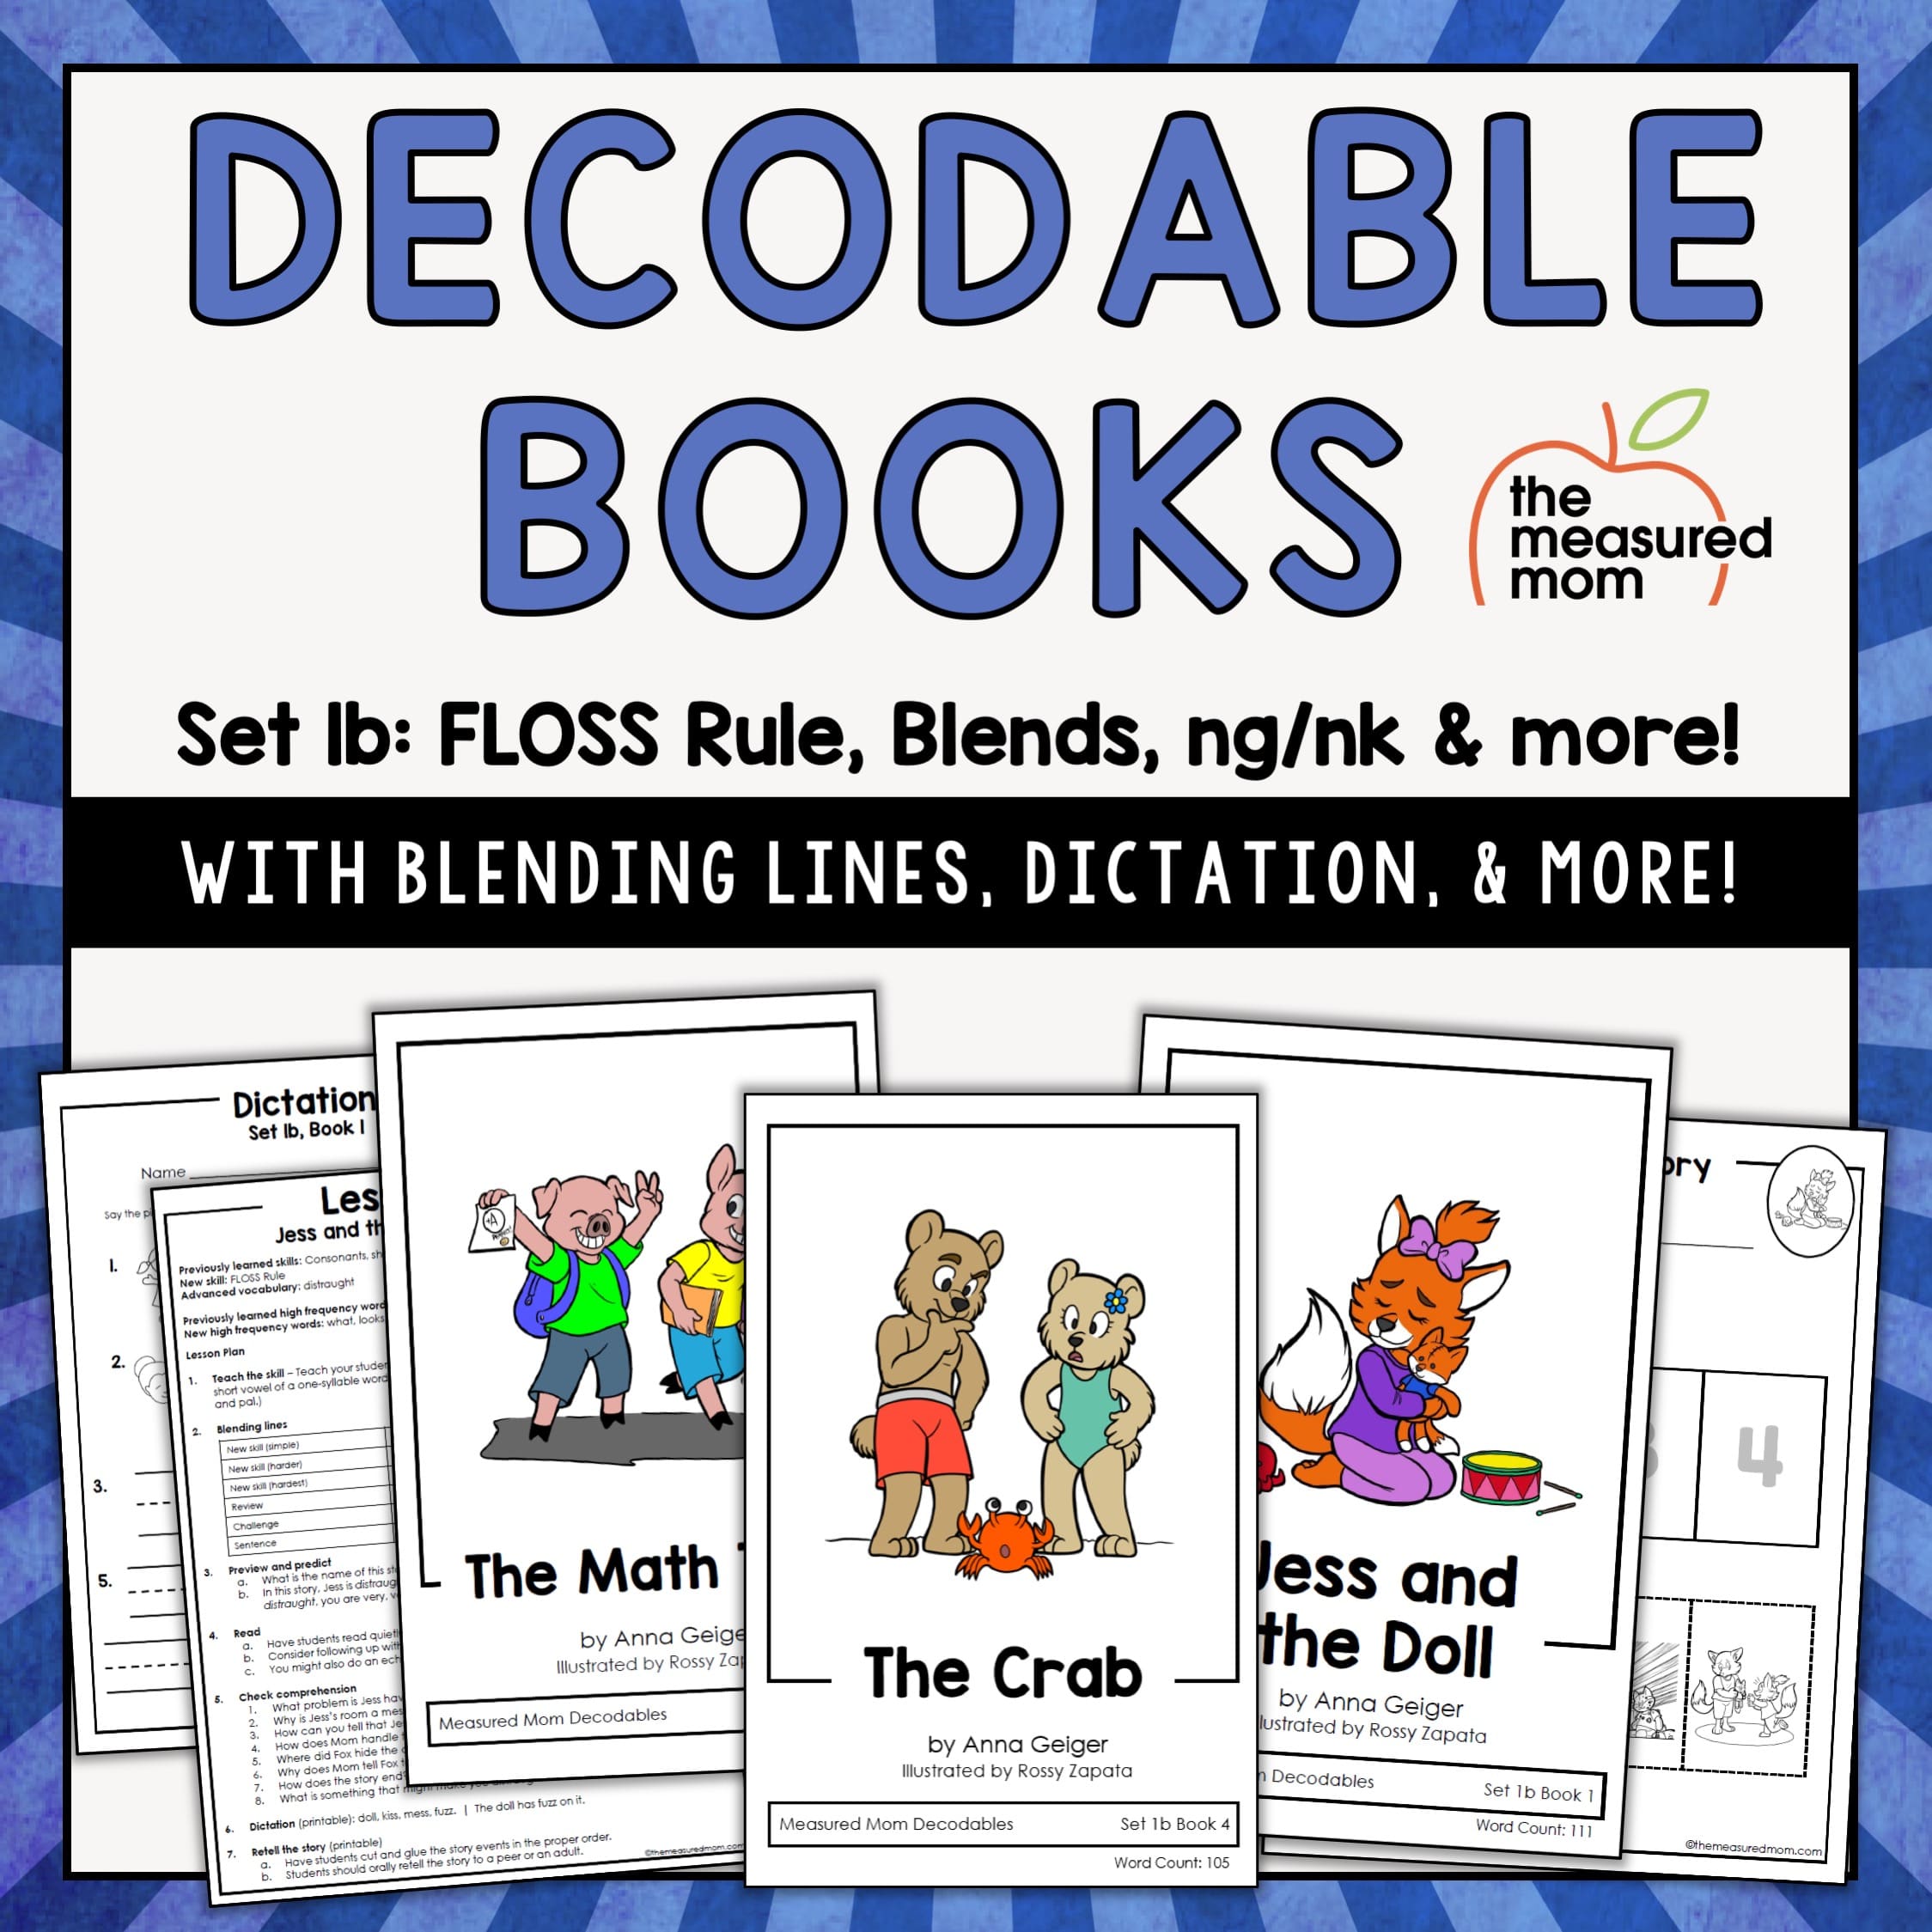 handle lejlighed Gym Decodable Books & Lessons Set 1b: FLOSS Rule, Blends, ng/nk and more - The  Measured Mom